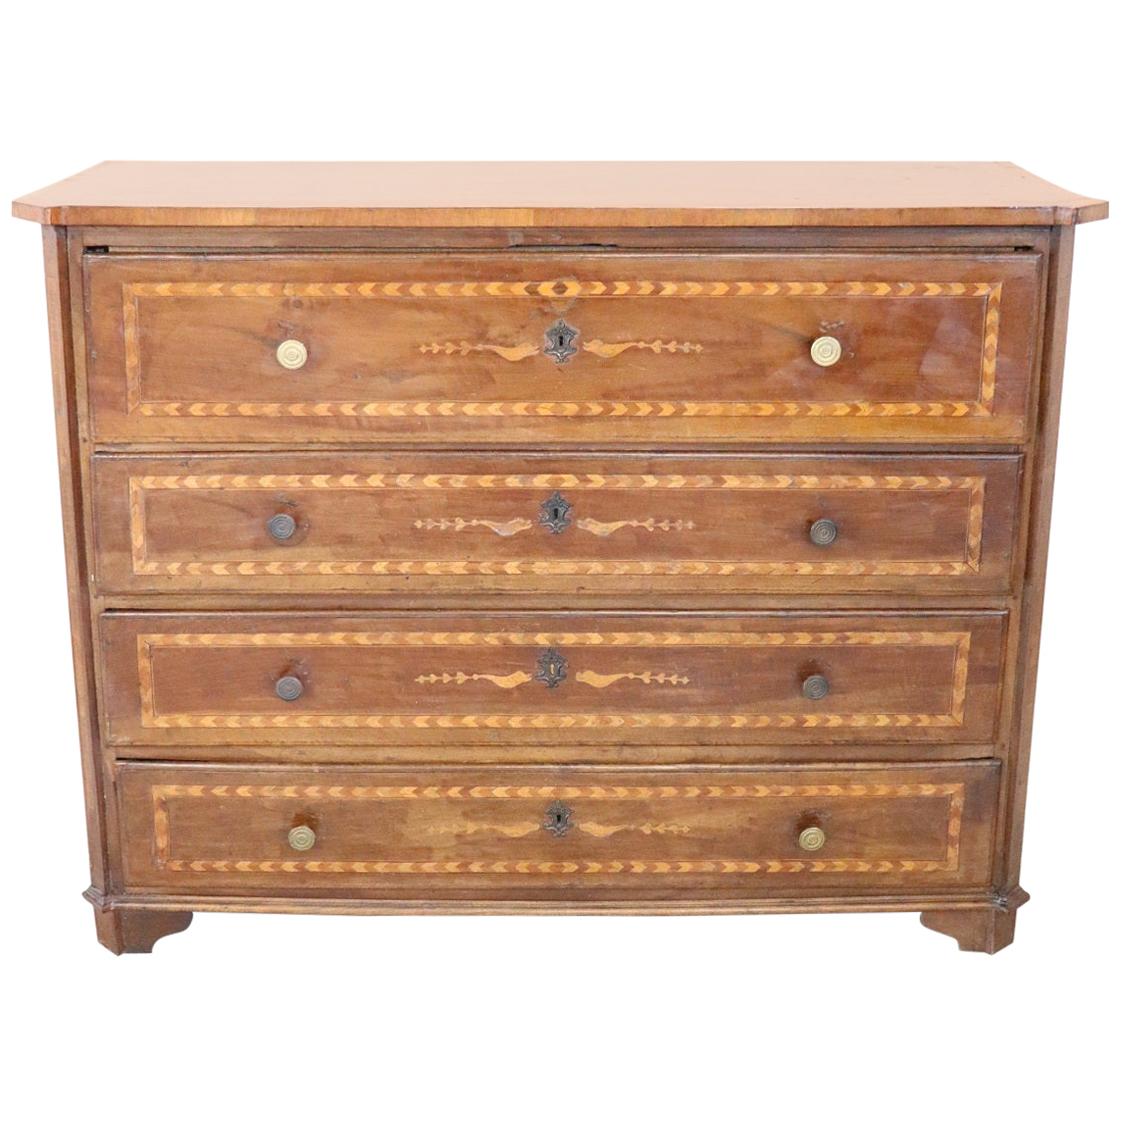 17th Century Italian Louis XIV Inlaid Walnut Commode or Chest of Drawer